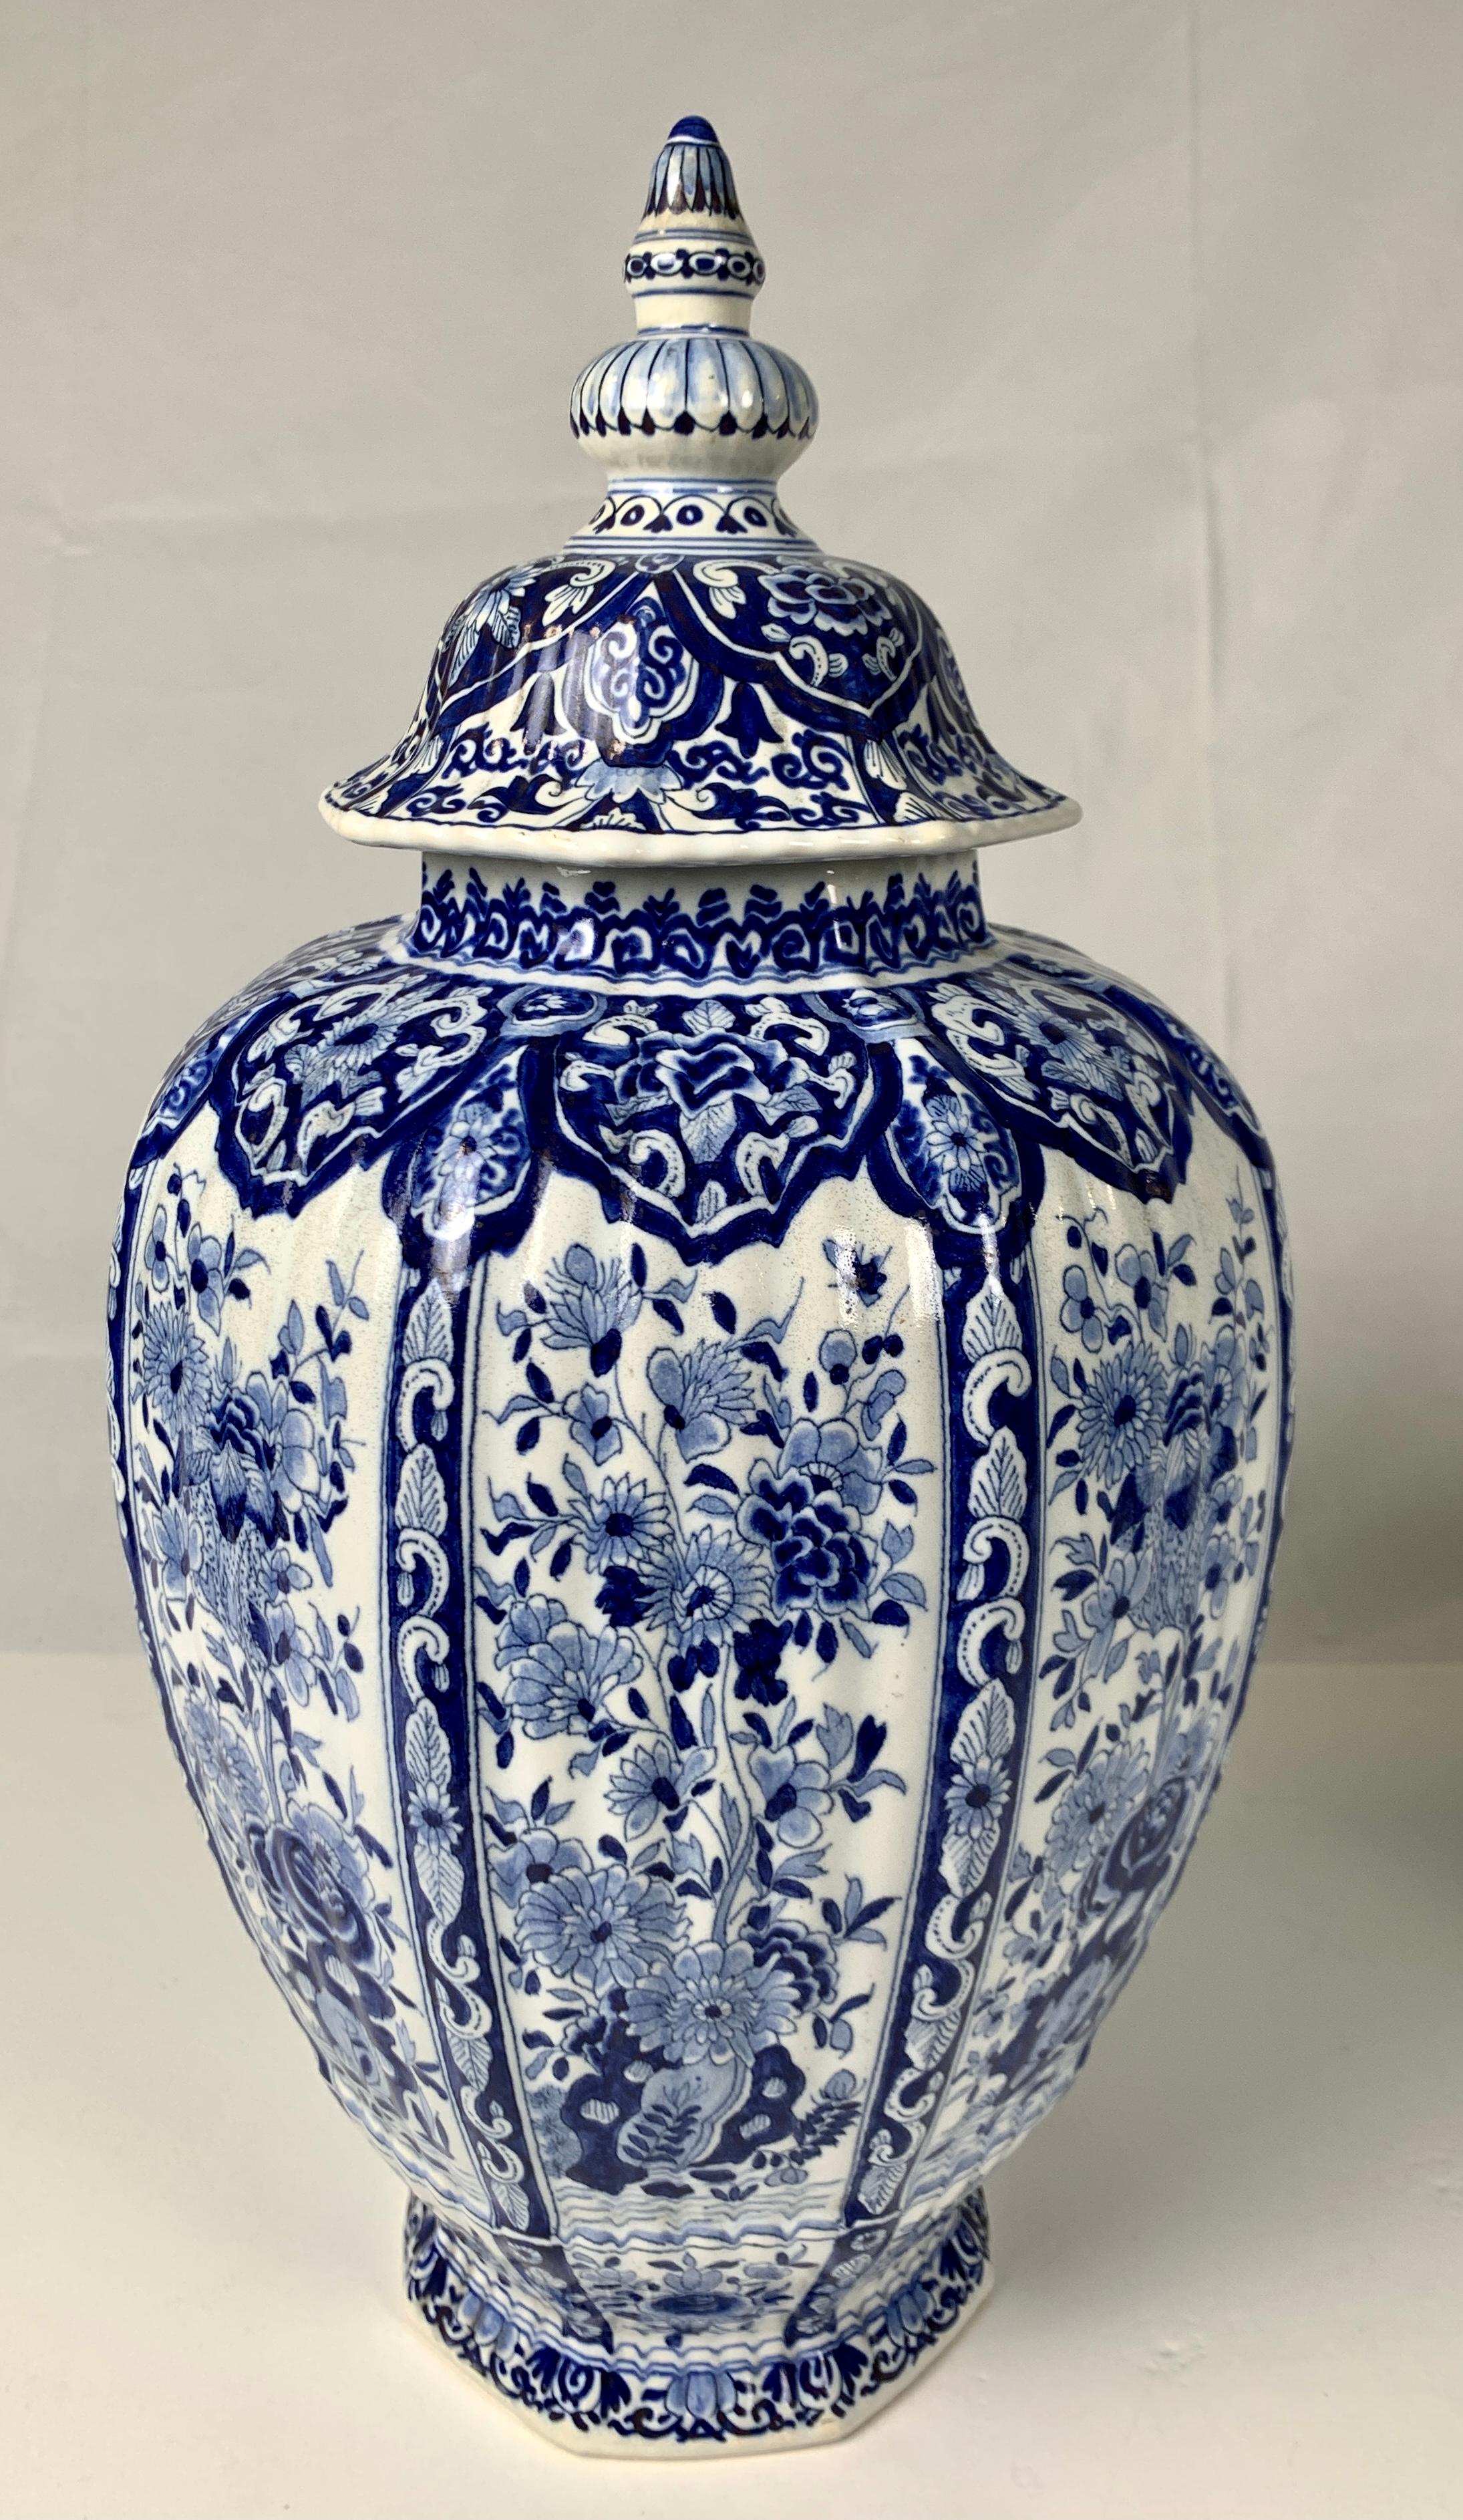 This pair of large Delft jars have a traditional blue chinoiserie decoration of flowers painted on a white tin-glaze ground. 
Each jar has six panels showing beautiful flowers flowing from rockwork.
The shoulders and cover are decorated with deep